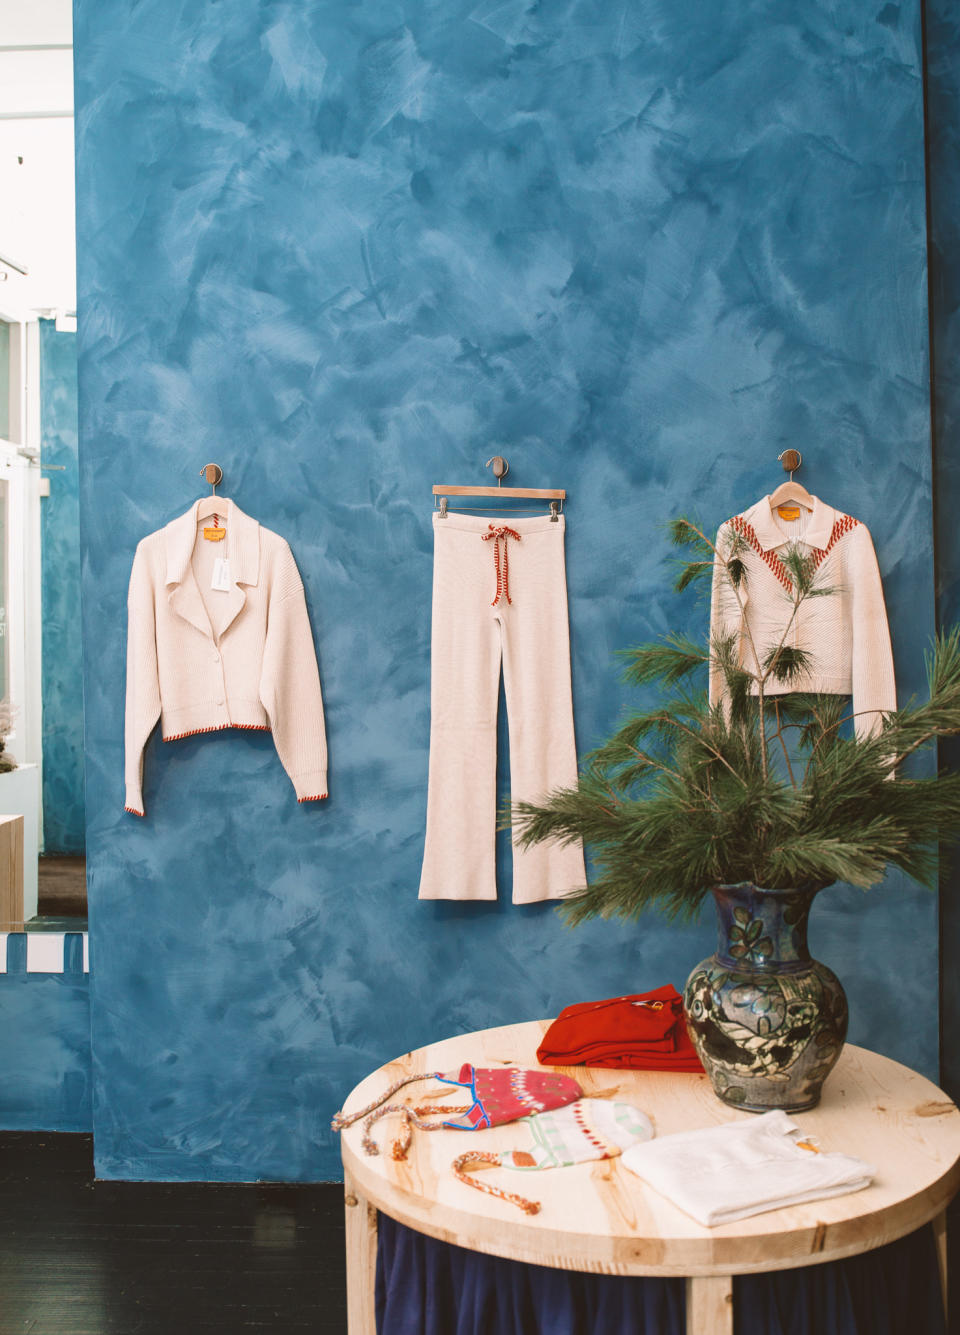 A look inside Guest in Residence’s NYC Feel Shop holiday pop-up.